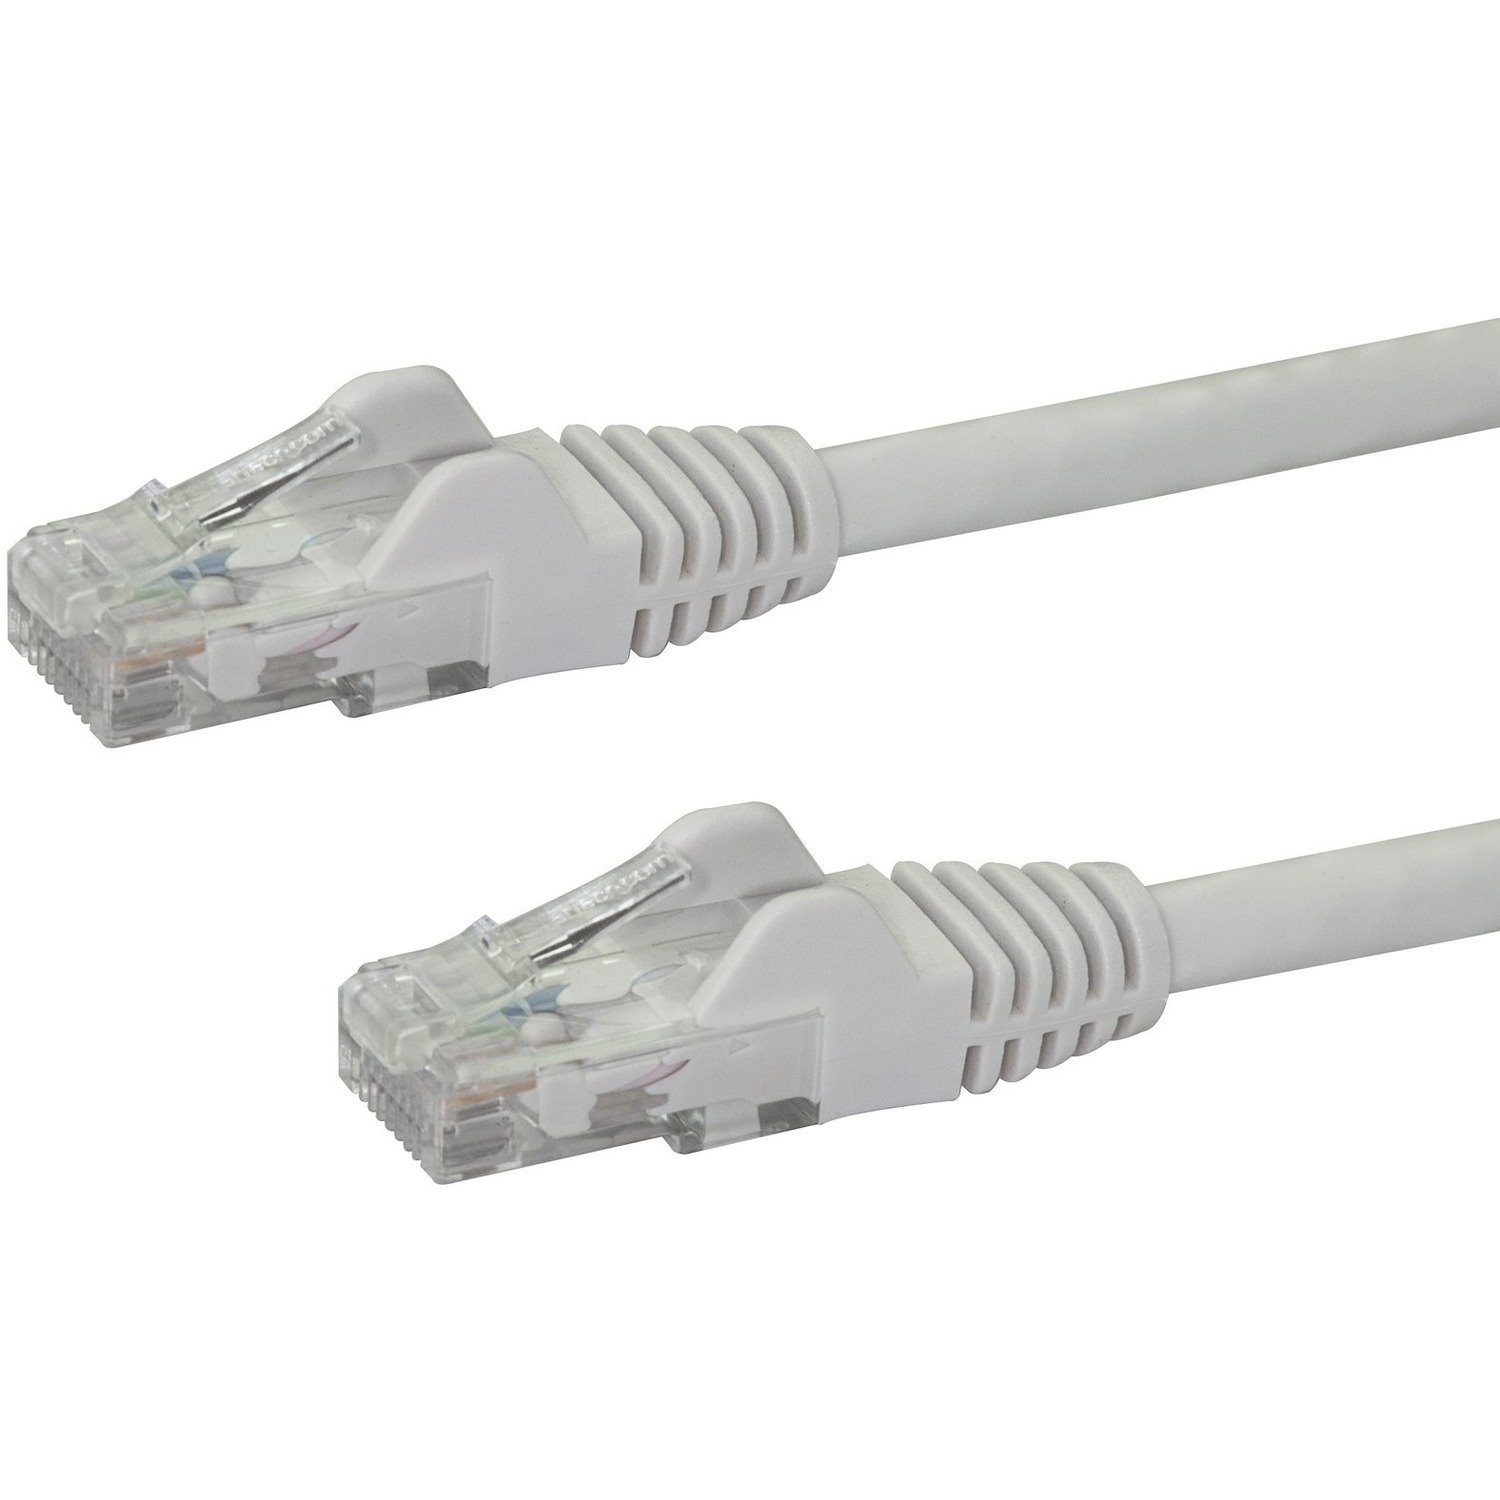 StarTech.com 14ft CAT6 Ethernet Cable - White Snagless Gigabit - 100W PoE UTP 650MHz Category 6 Patch Cord UL Certified Wiring/TIA